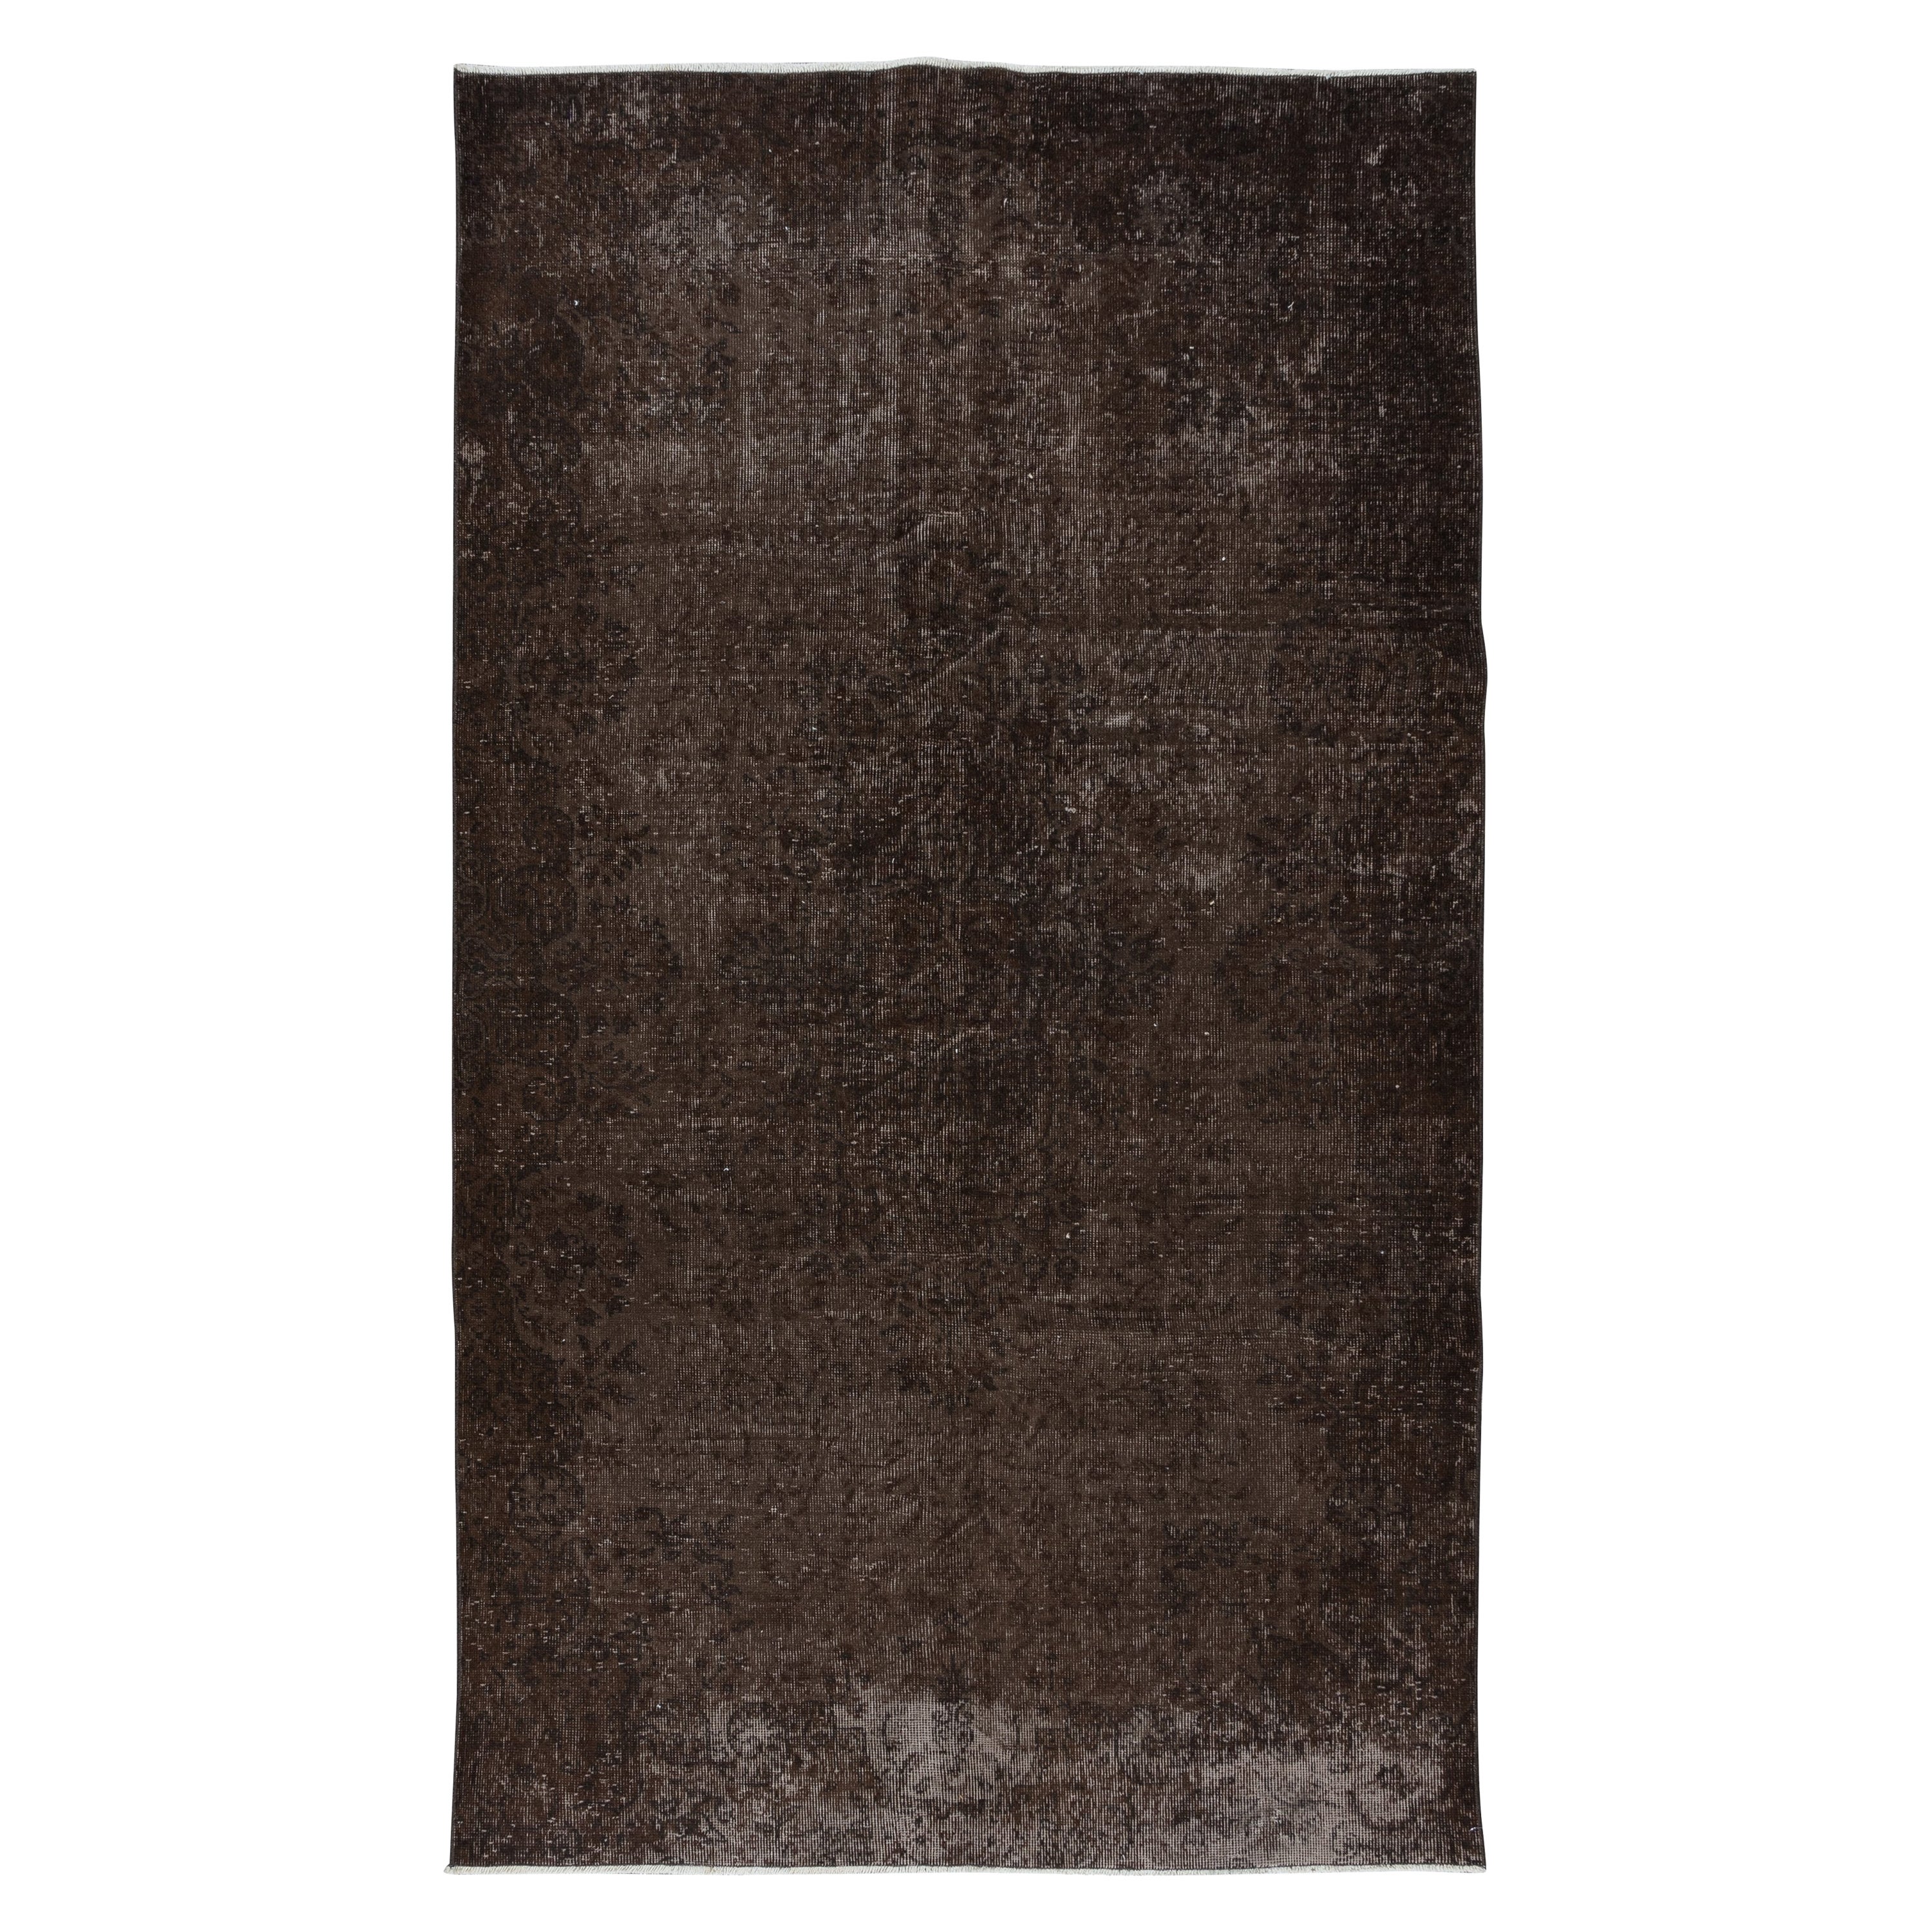 5x9 Ft Upcycled Handmade Turkish Area Rug, Brown ReDyed Carpet for Home & Office For Sale